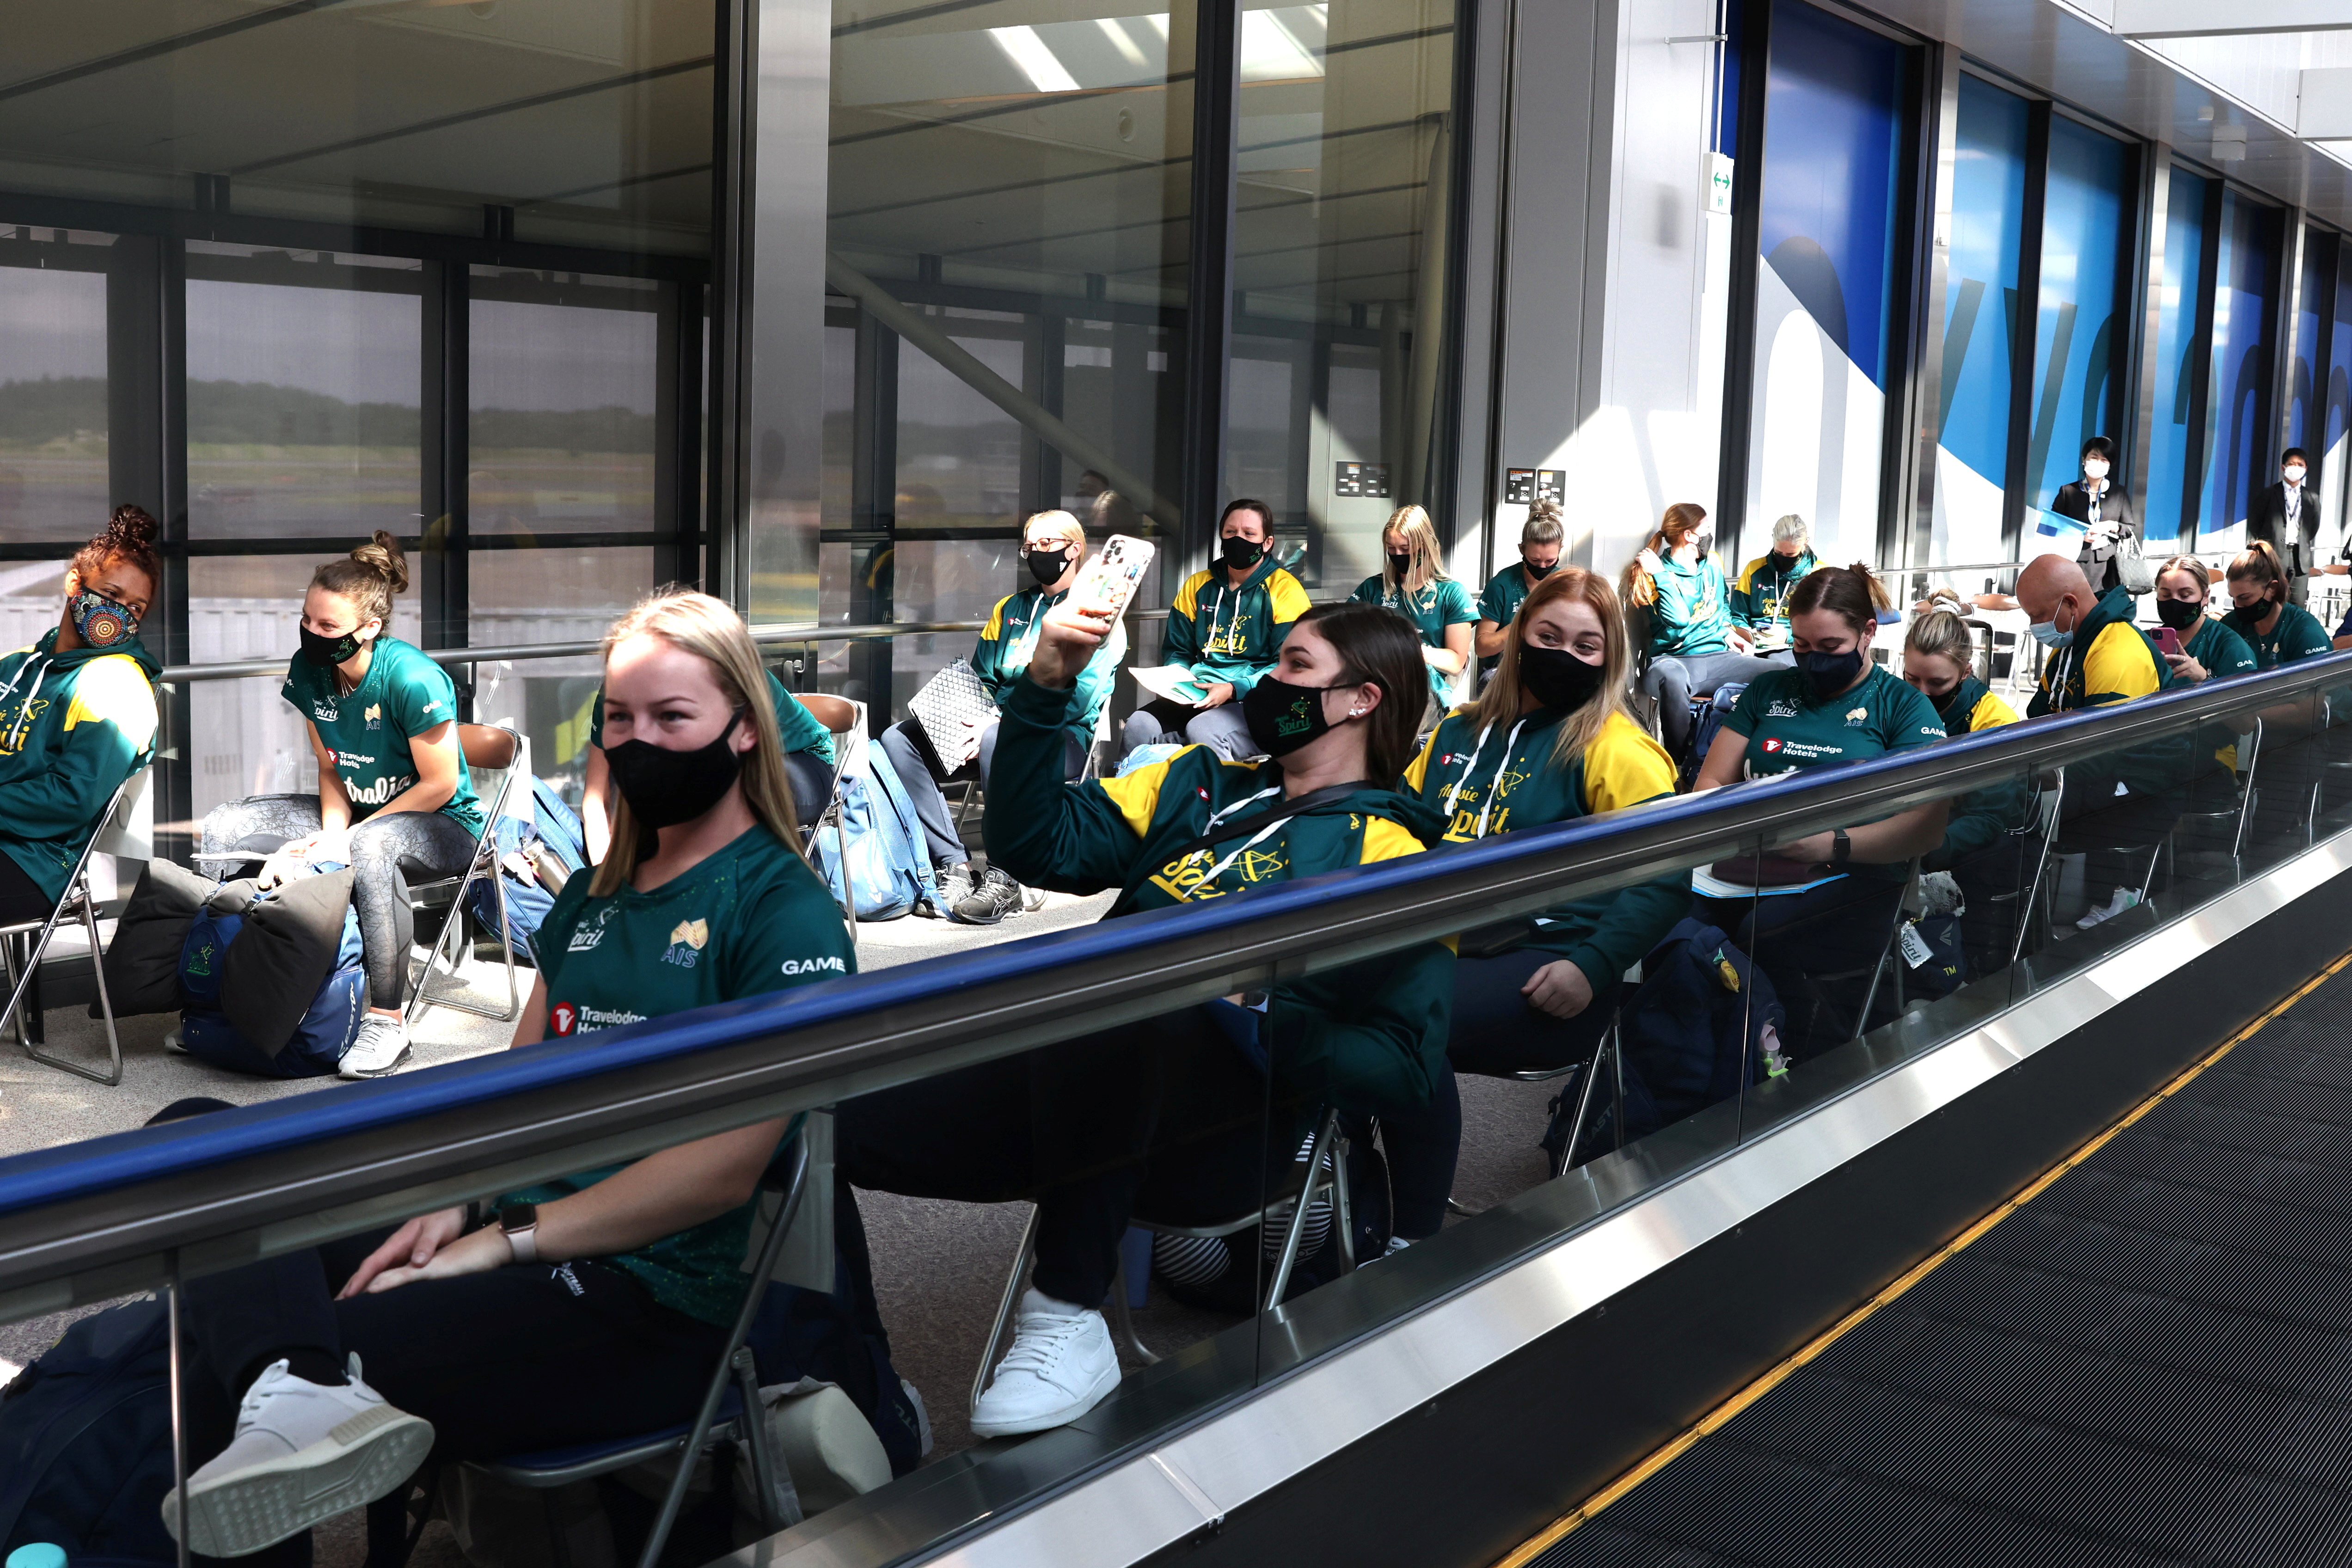 Australian softball national team players wait to take the quantitative antigen test after arriving at Narita Airport in Chiba prefecture, Japan, June 1, 2021, to take part in the upcoming Tokyo 2020 Olympic Games. Behrouz Mehri/Pool via REUTERS